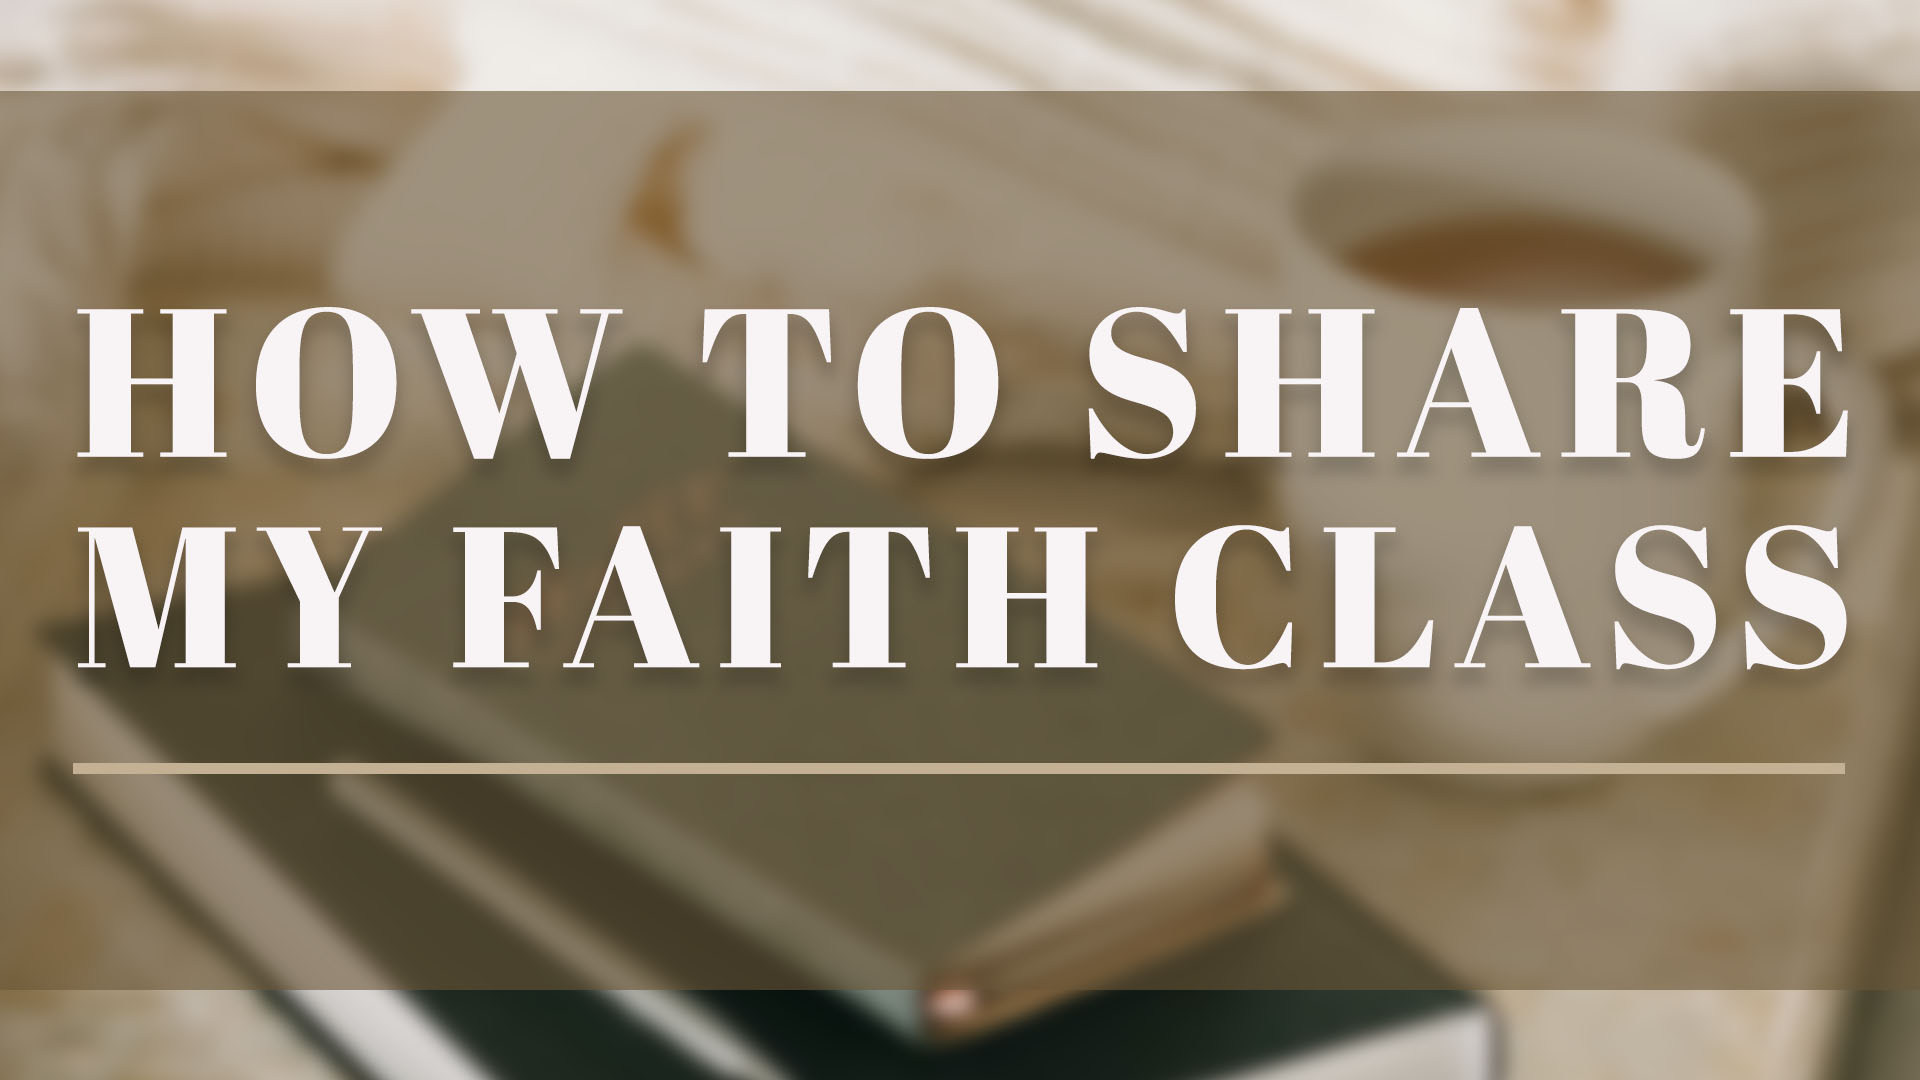 How To Share My Faith

Meeting at Grace Church
Sunday | 9:00am
May 26
